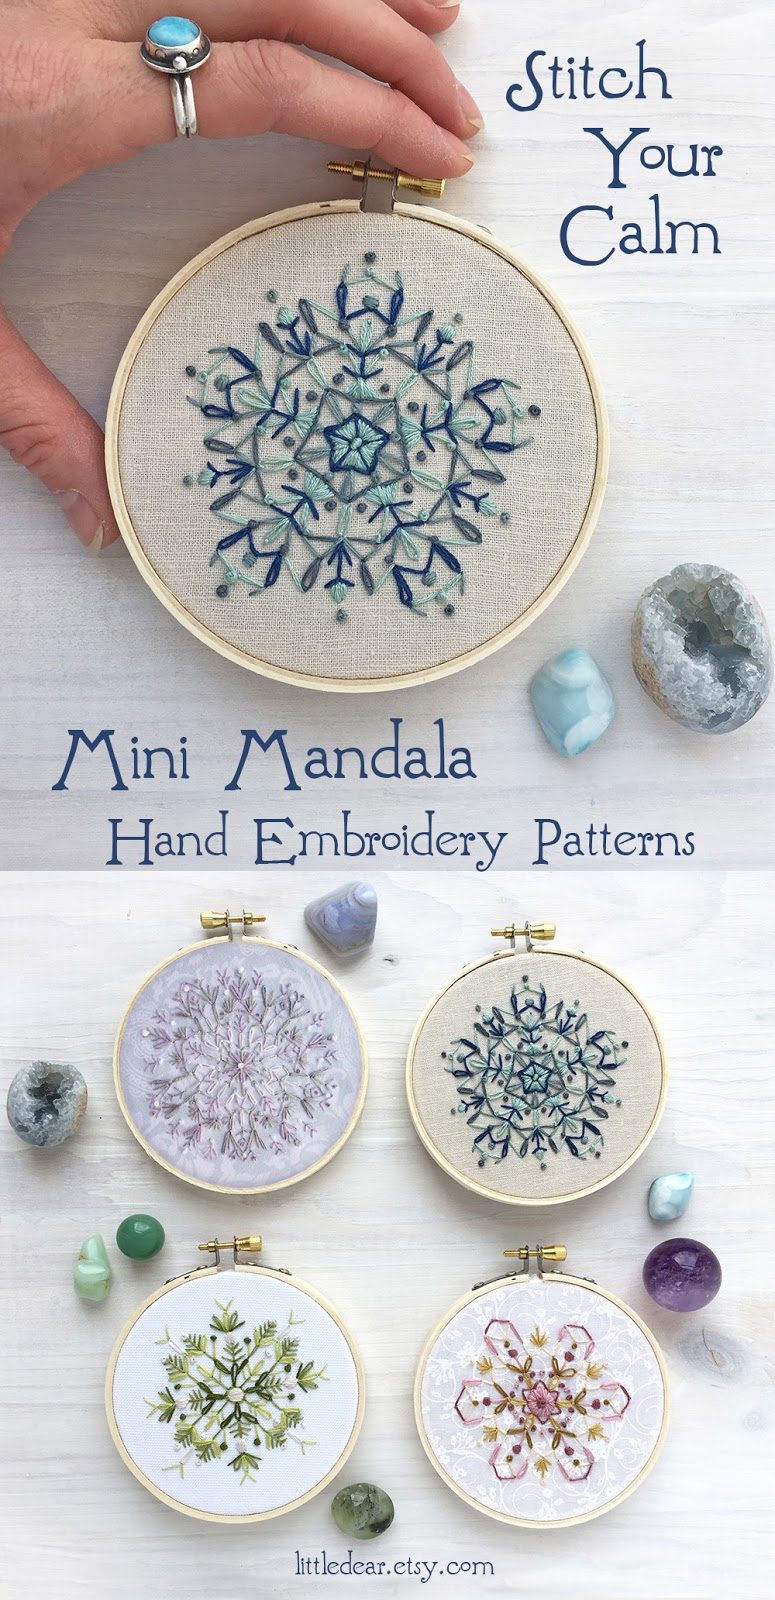 New Hand Embroidery Patterns Little Dear Tracks Mandala Embroidery Patterns